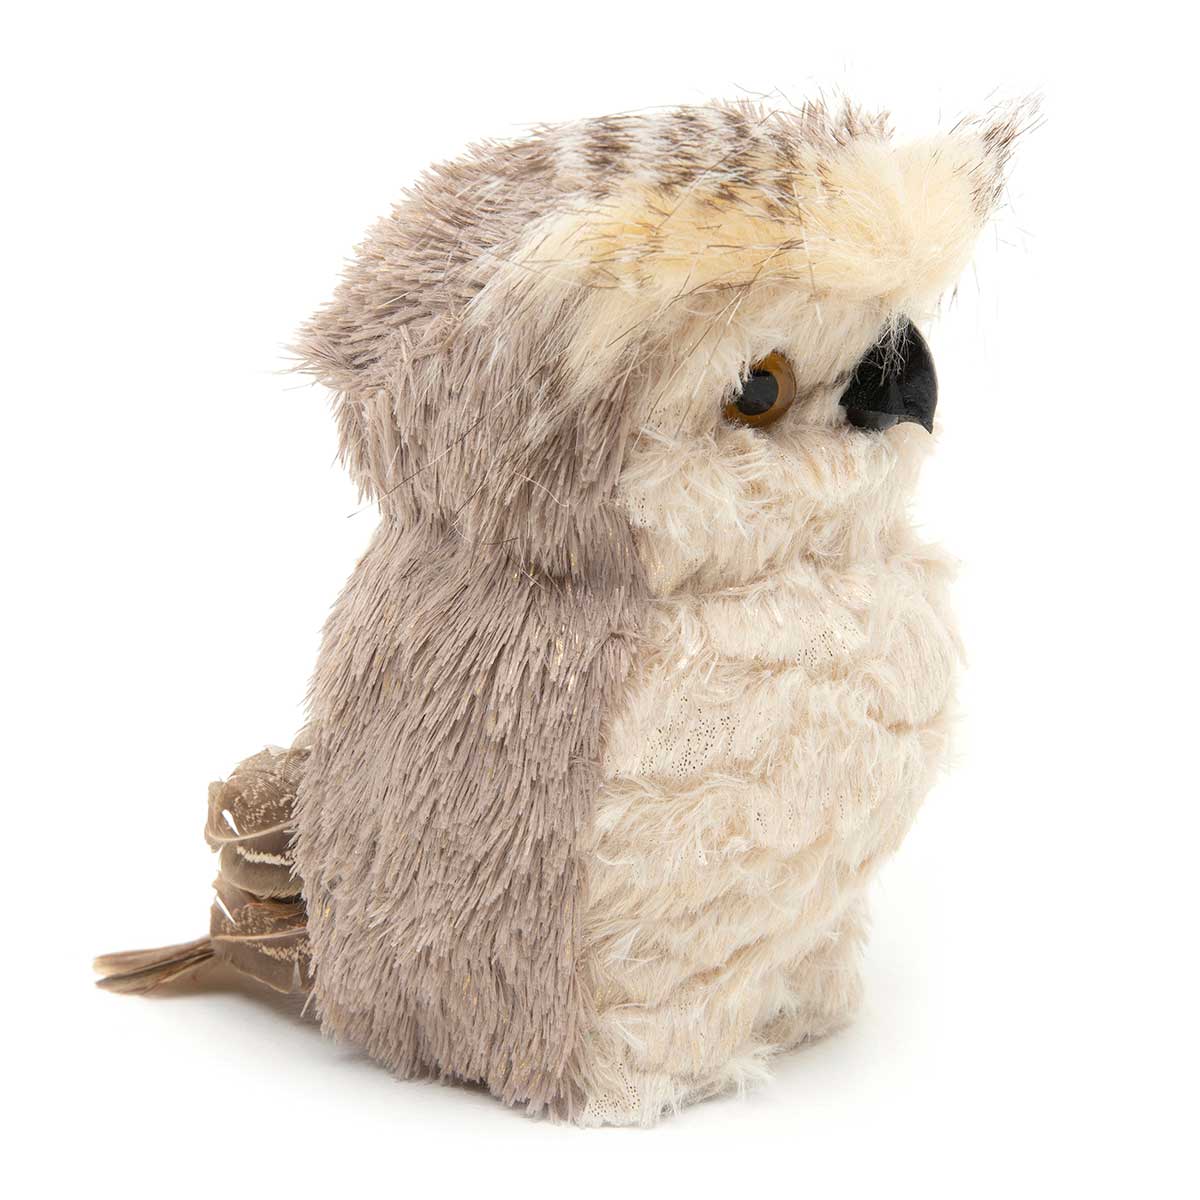 OWL FEATHERED LARGE 3.75IN X 5.75IN X 6IN BROWN/CREAM